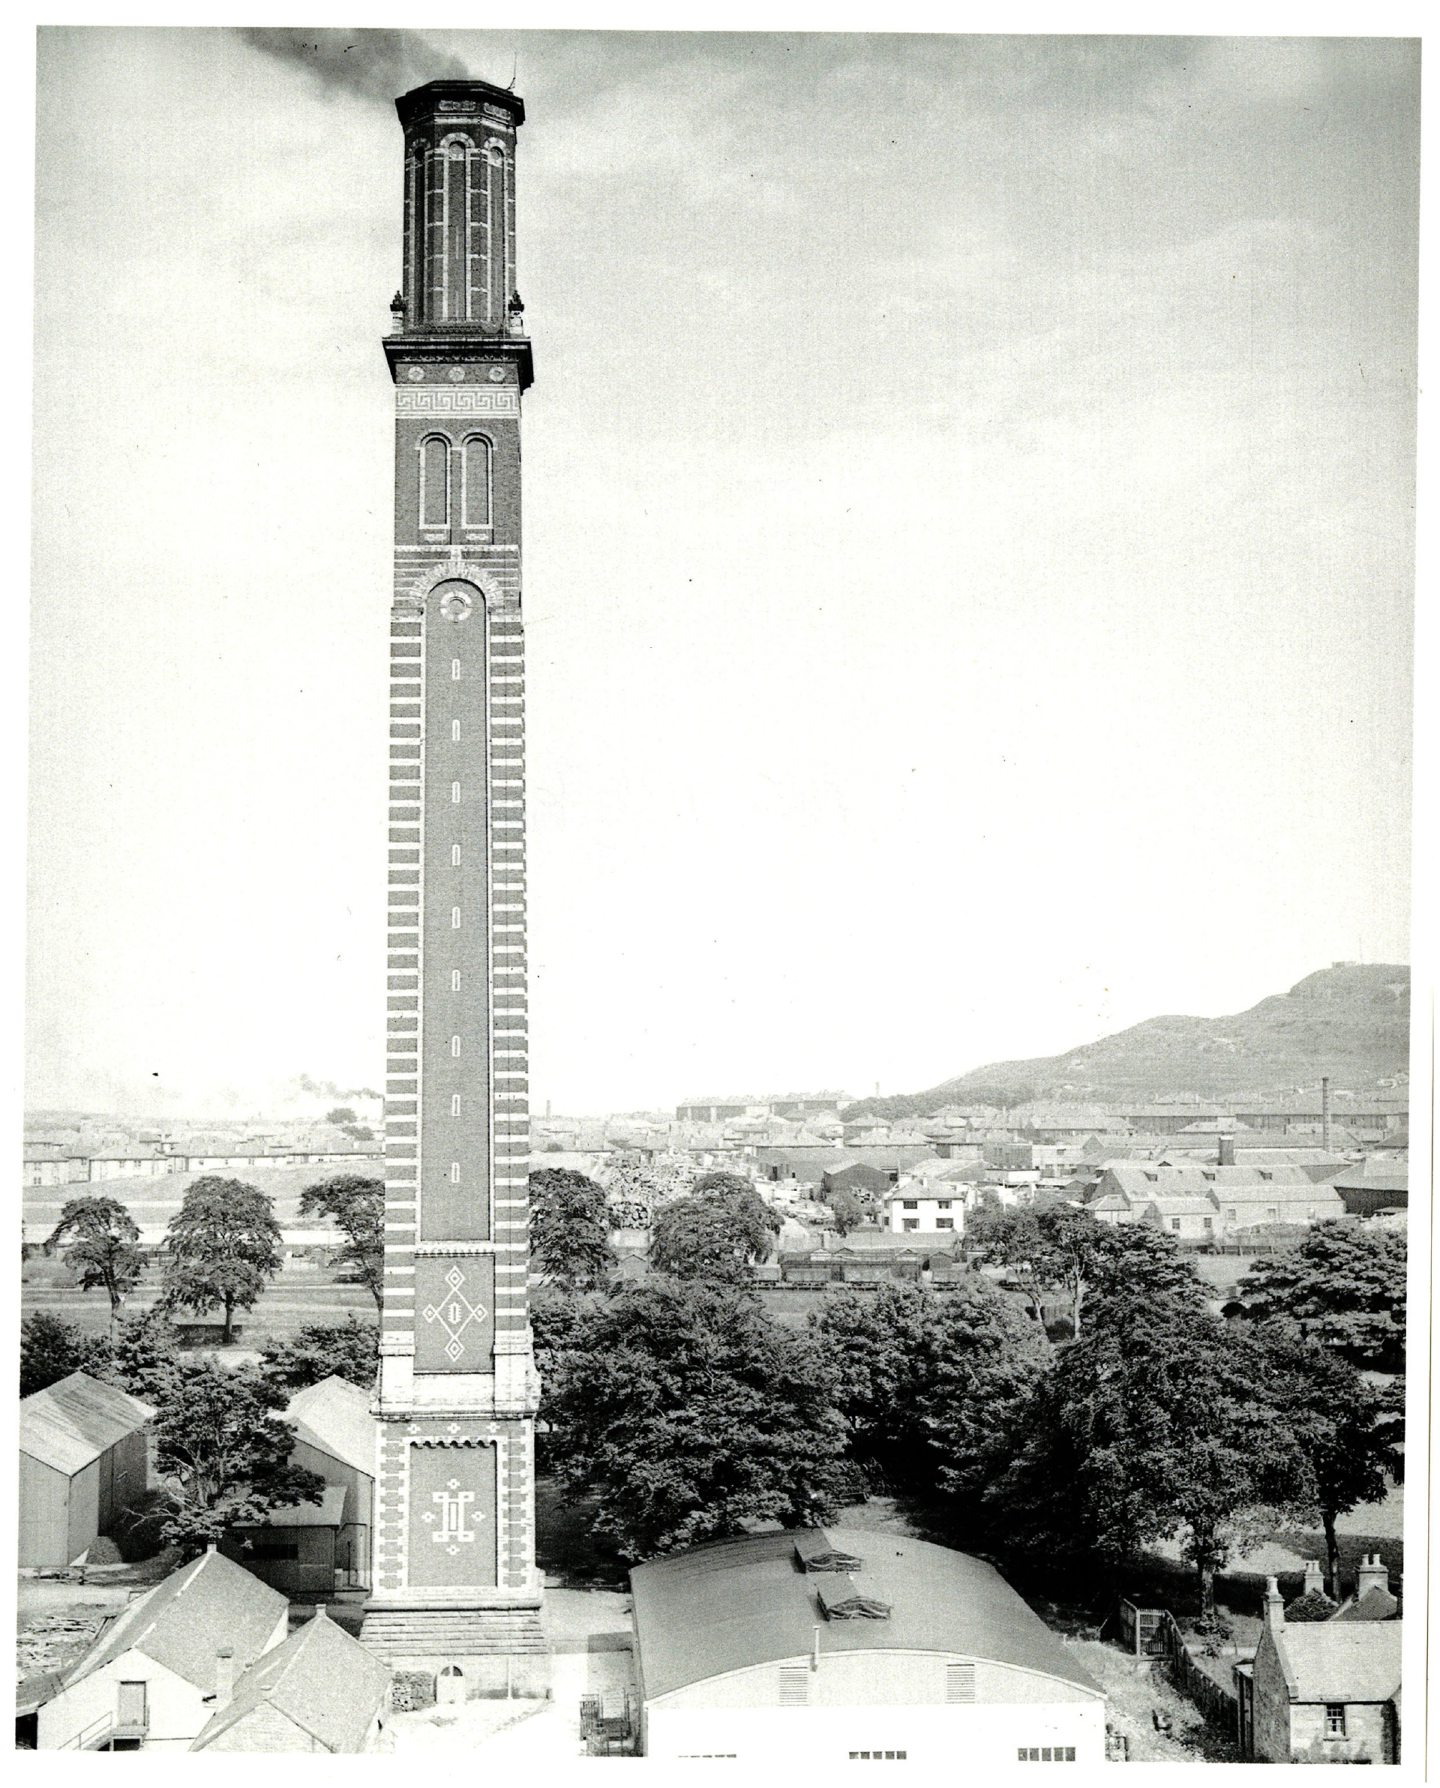 The iconic chimney was built in the 1860s.